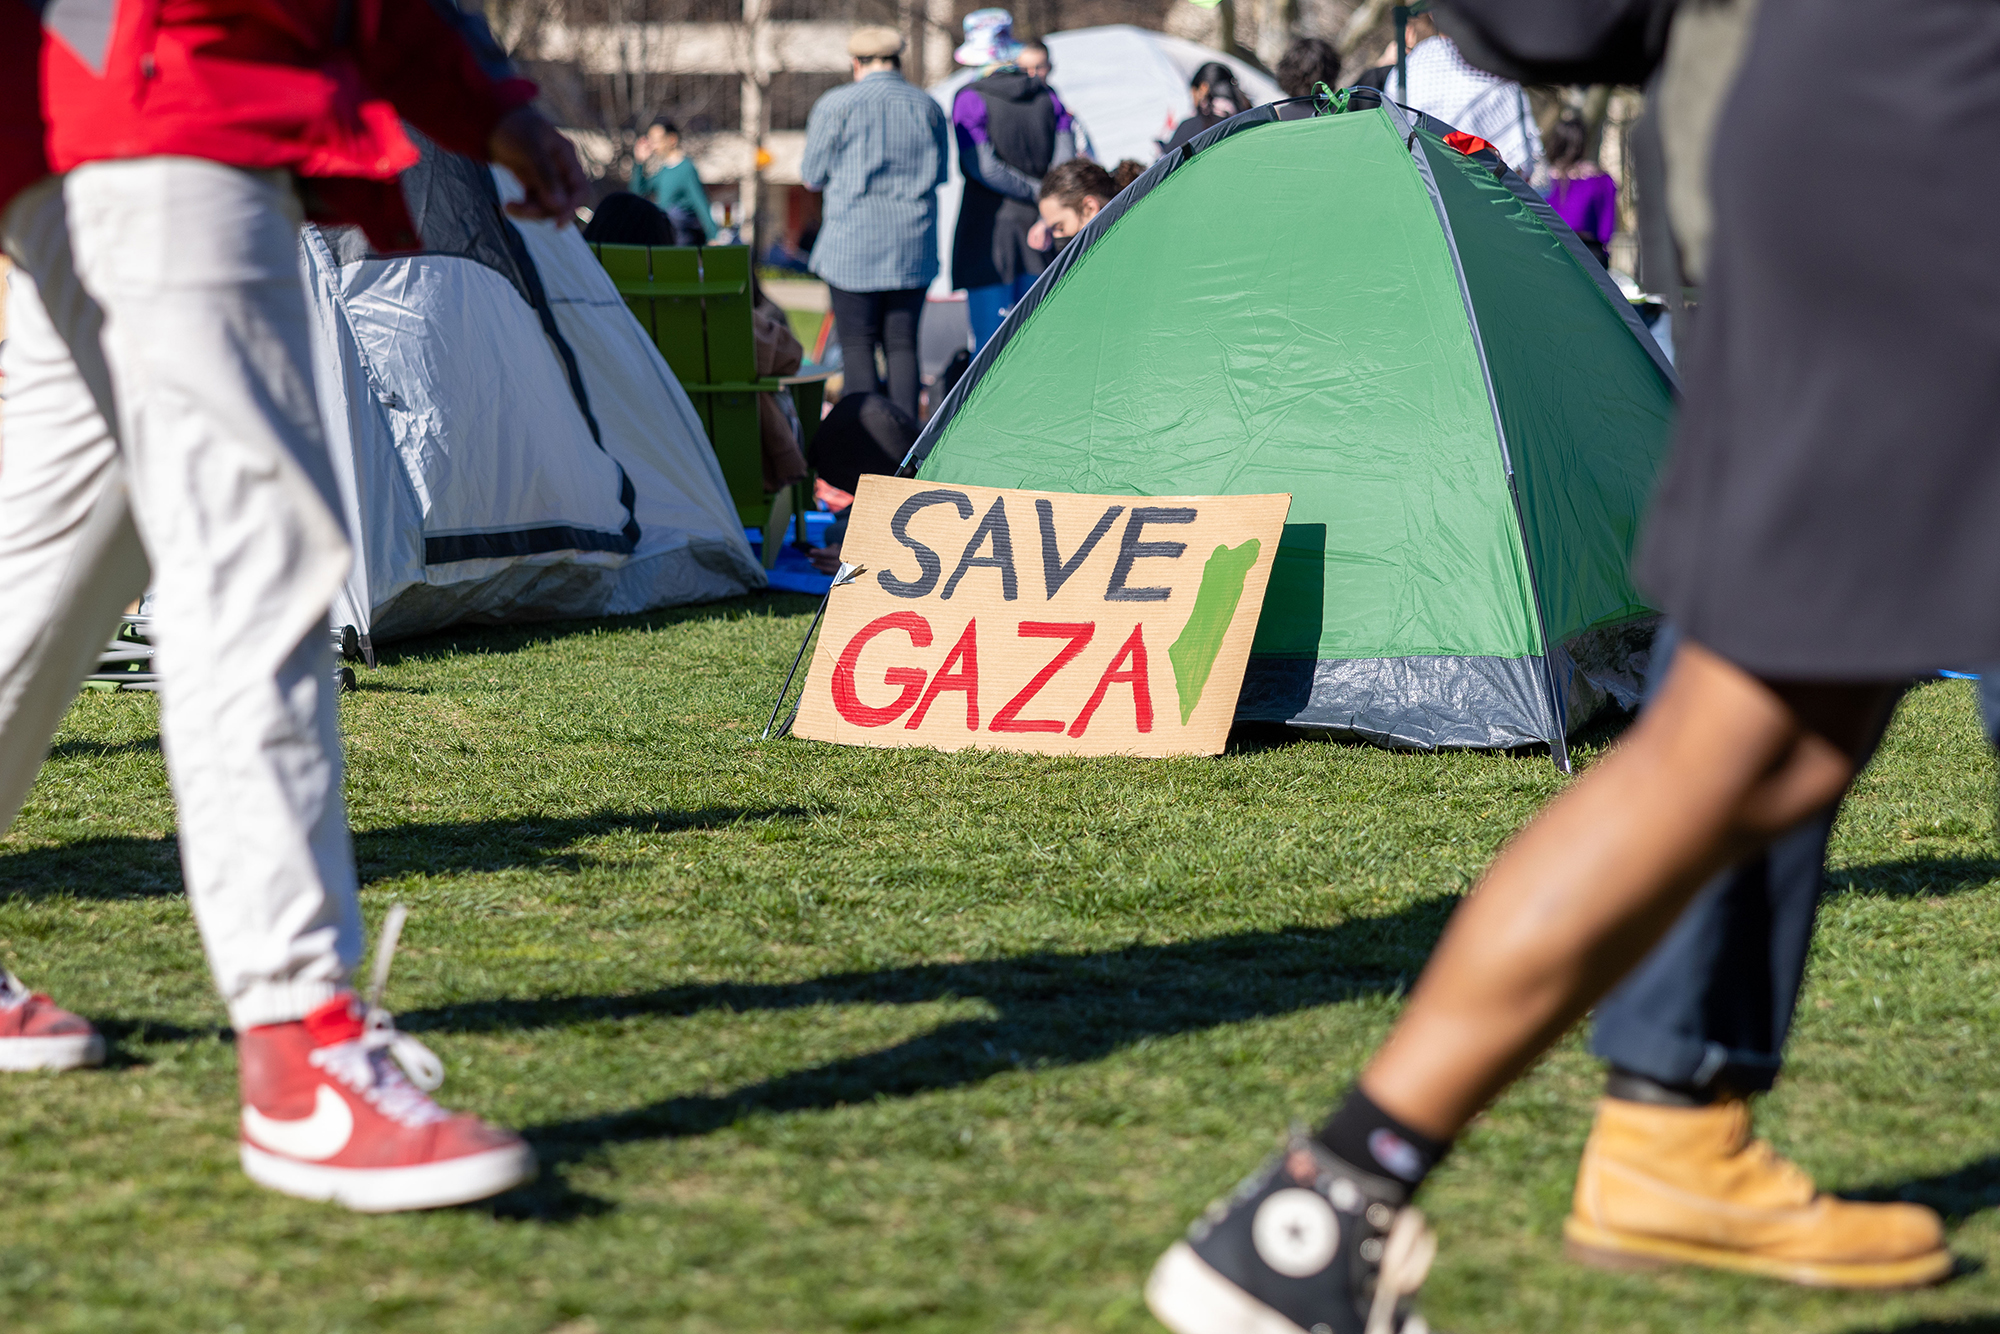 Students from Massachusetts of Technology, Harvard University and others rally at a protest encampment by The Scientists Against Genocide on Massachusetts Institute of Technology's Kresge Lawn on April 22 in Cambridge, Massachusetts. The encampment was set up to protest Israel's military campaign in Gaza and the university's relationship with the Israel Defense Forces. 